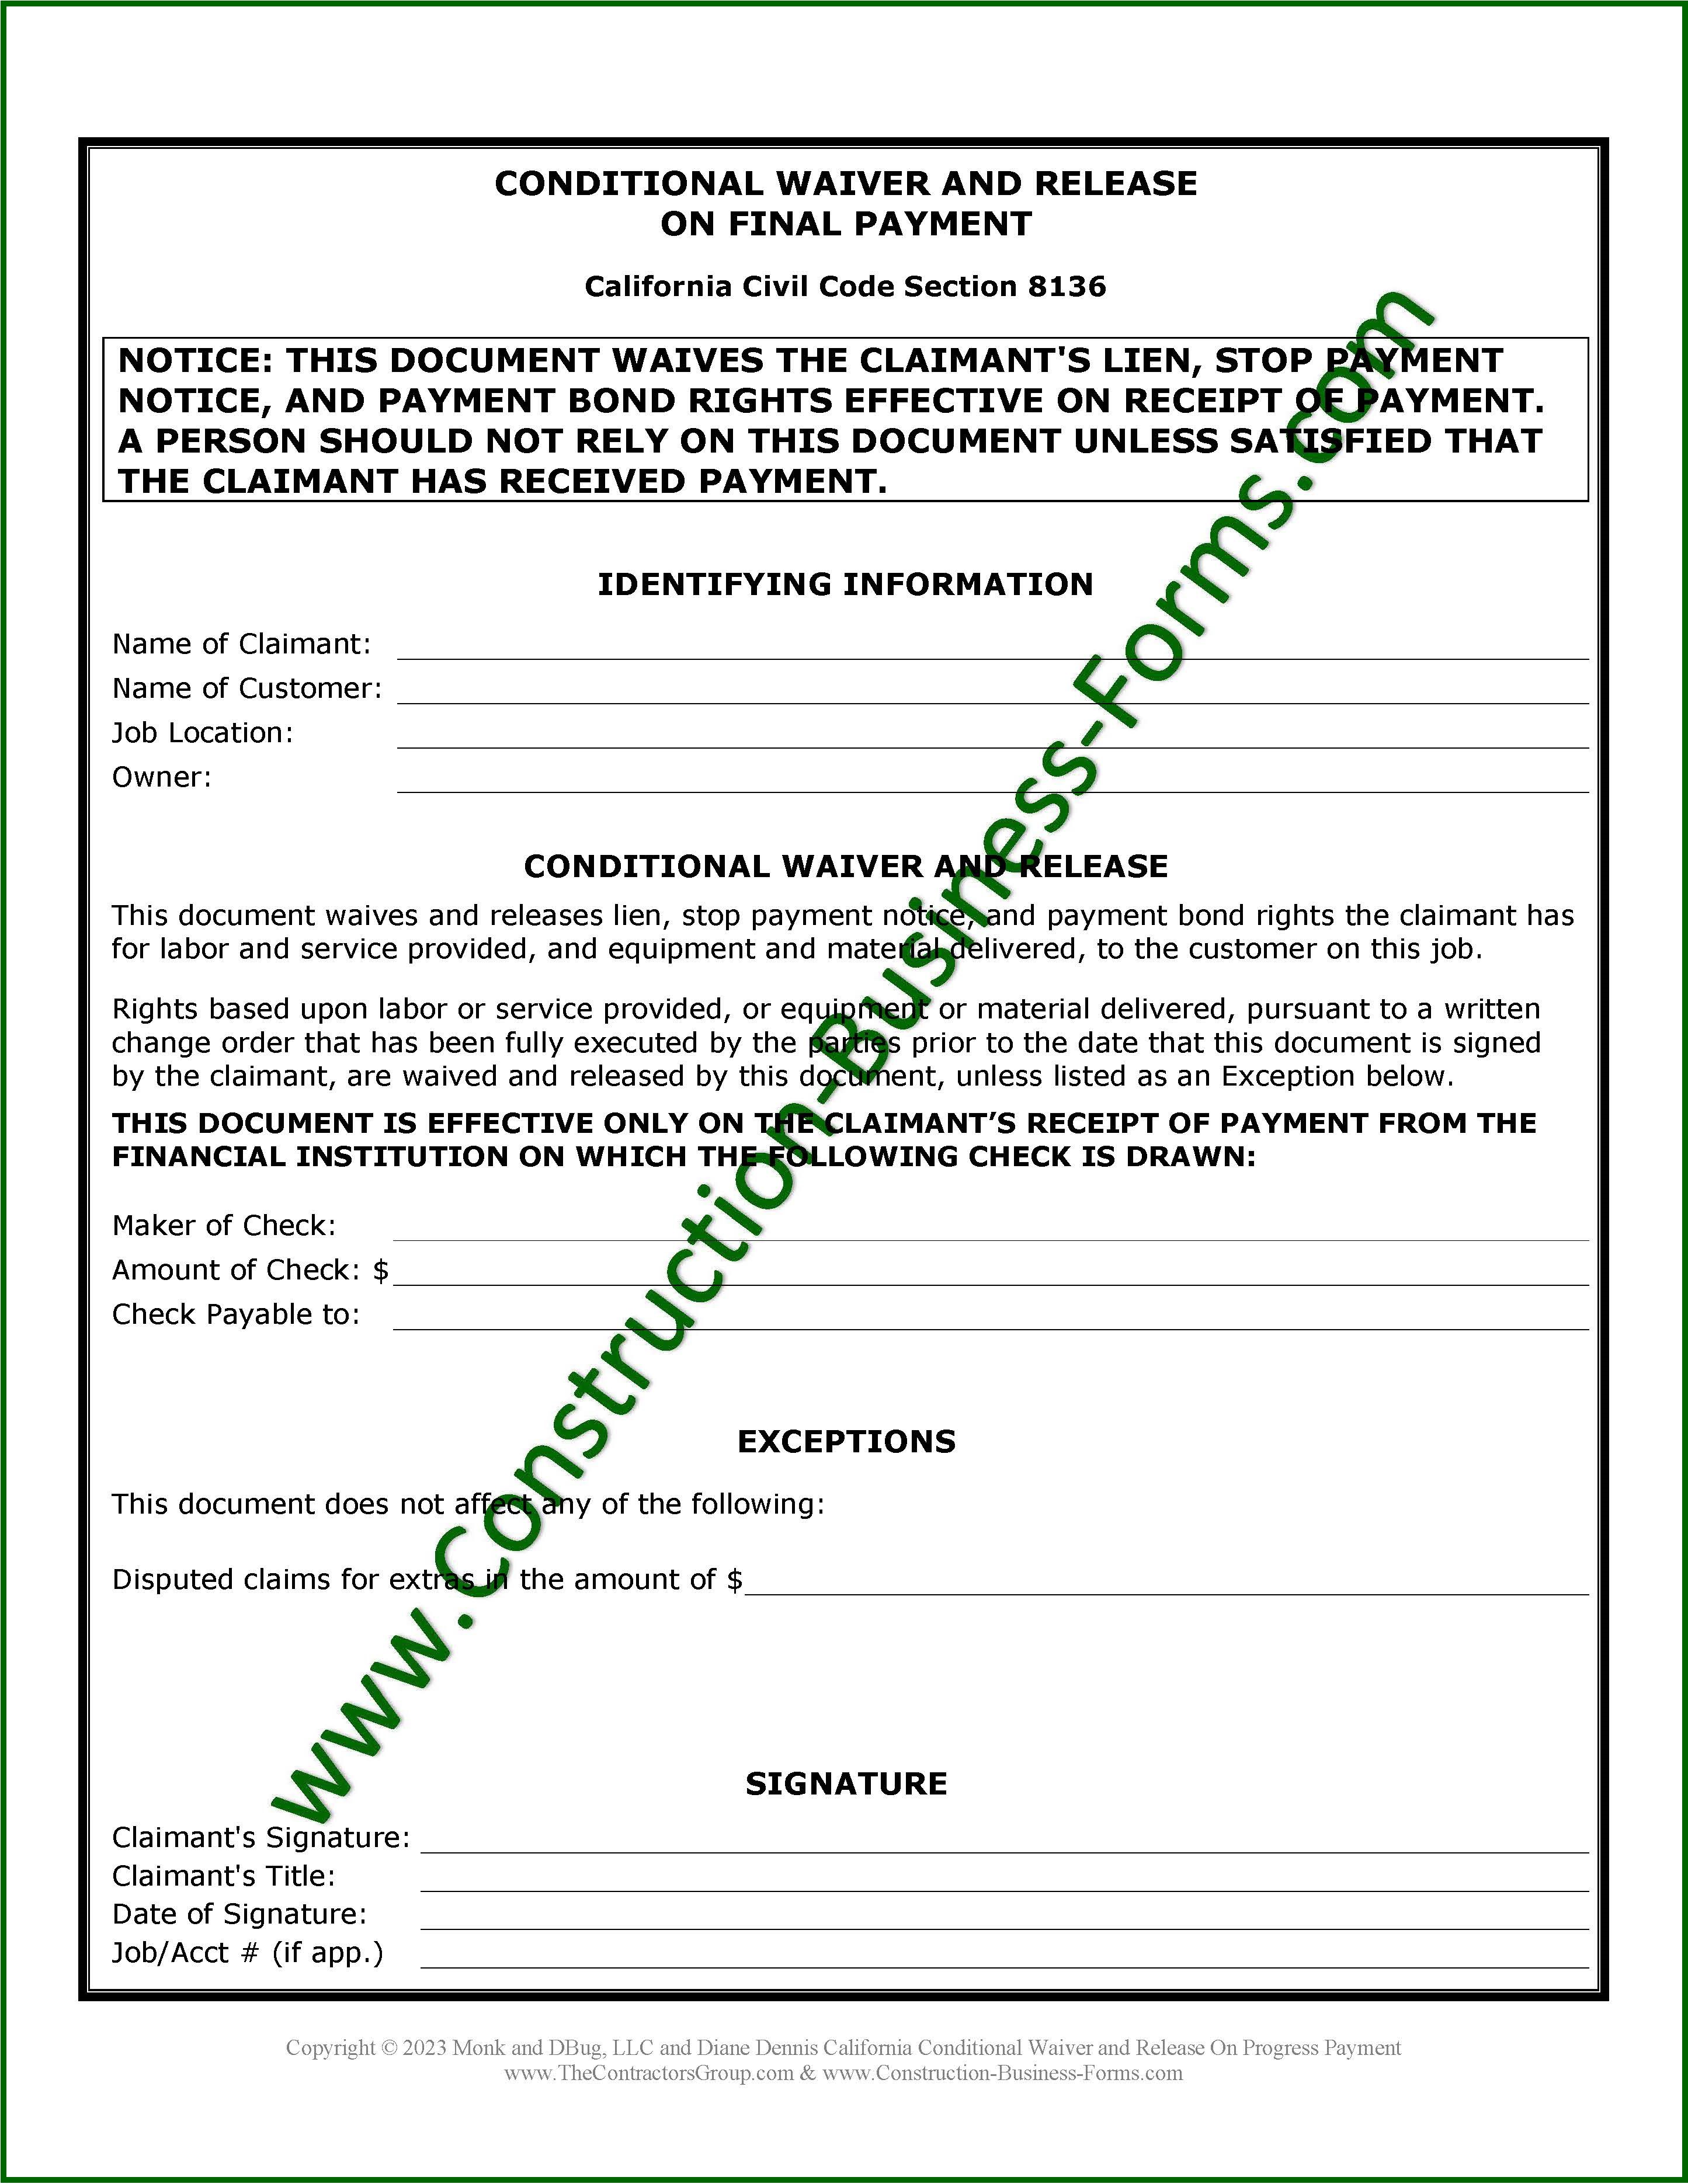 Image of Conditional Lien Waiver Release On Final Payment form for California